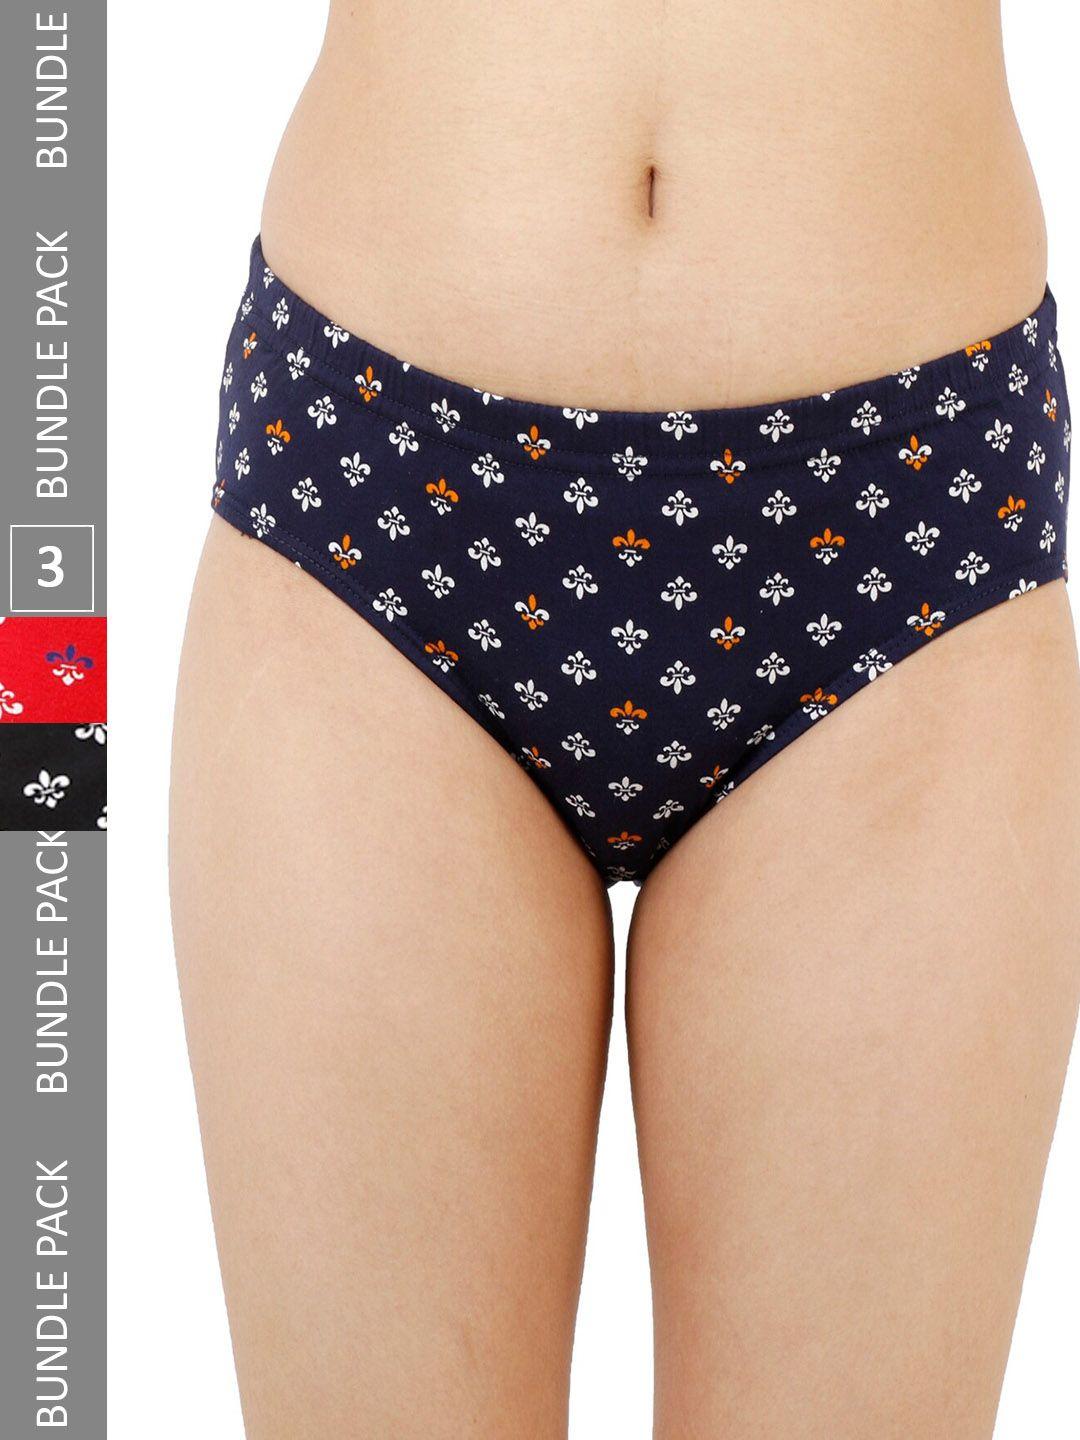 ladyland women pack of 3 assorted floral printed cotton hipster briefs